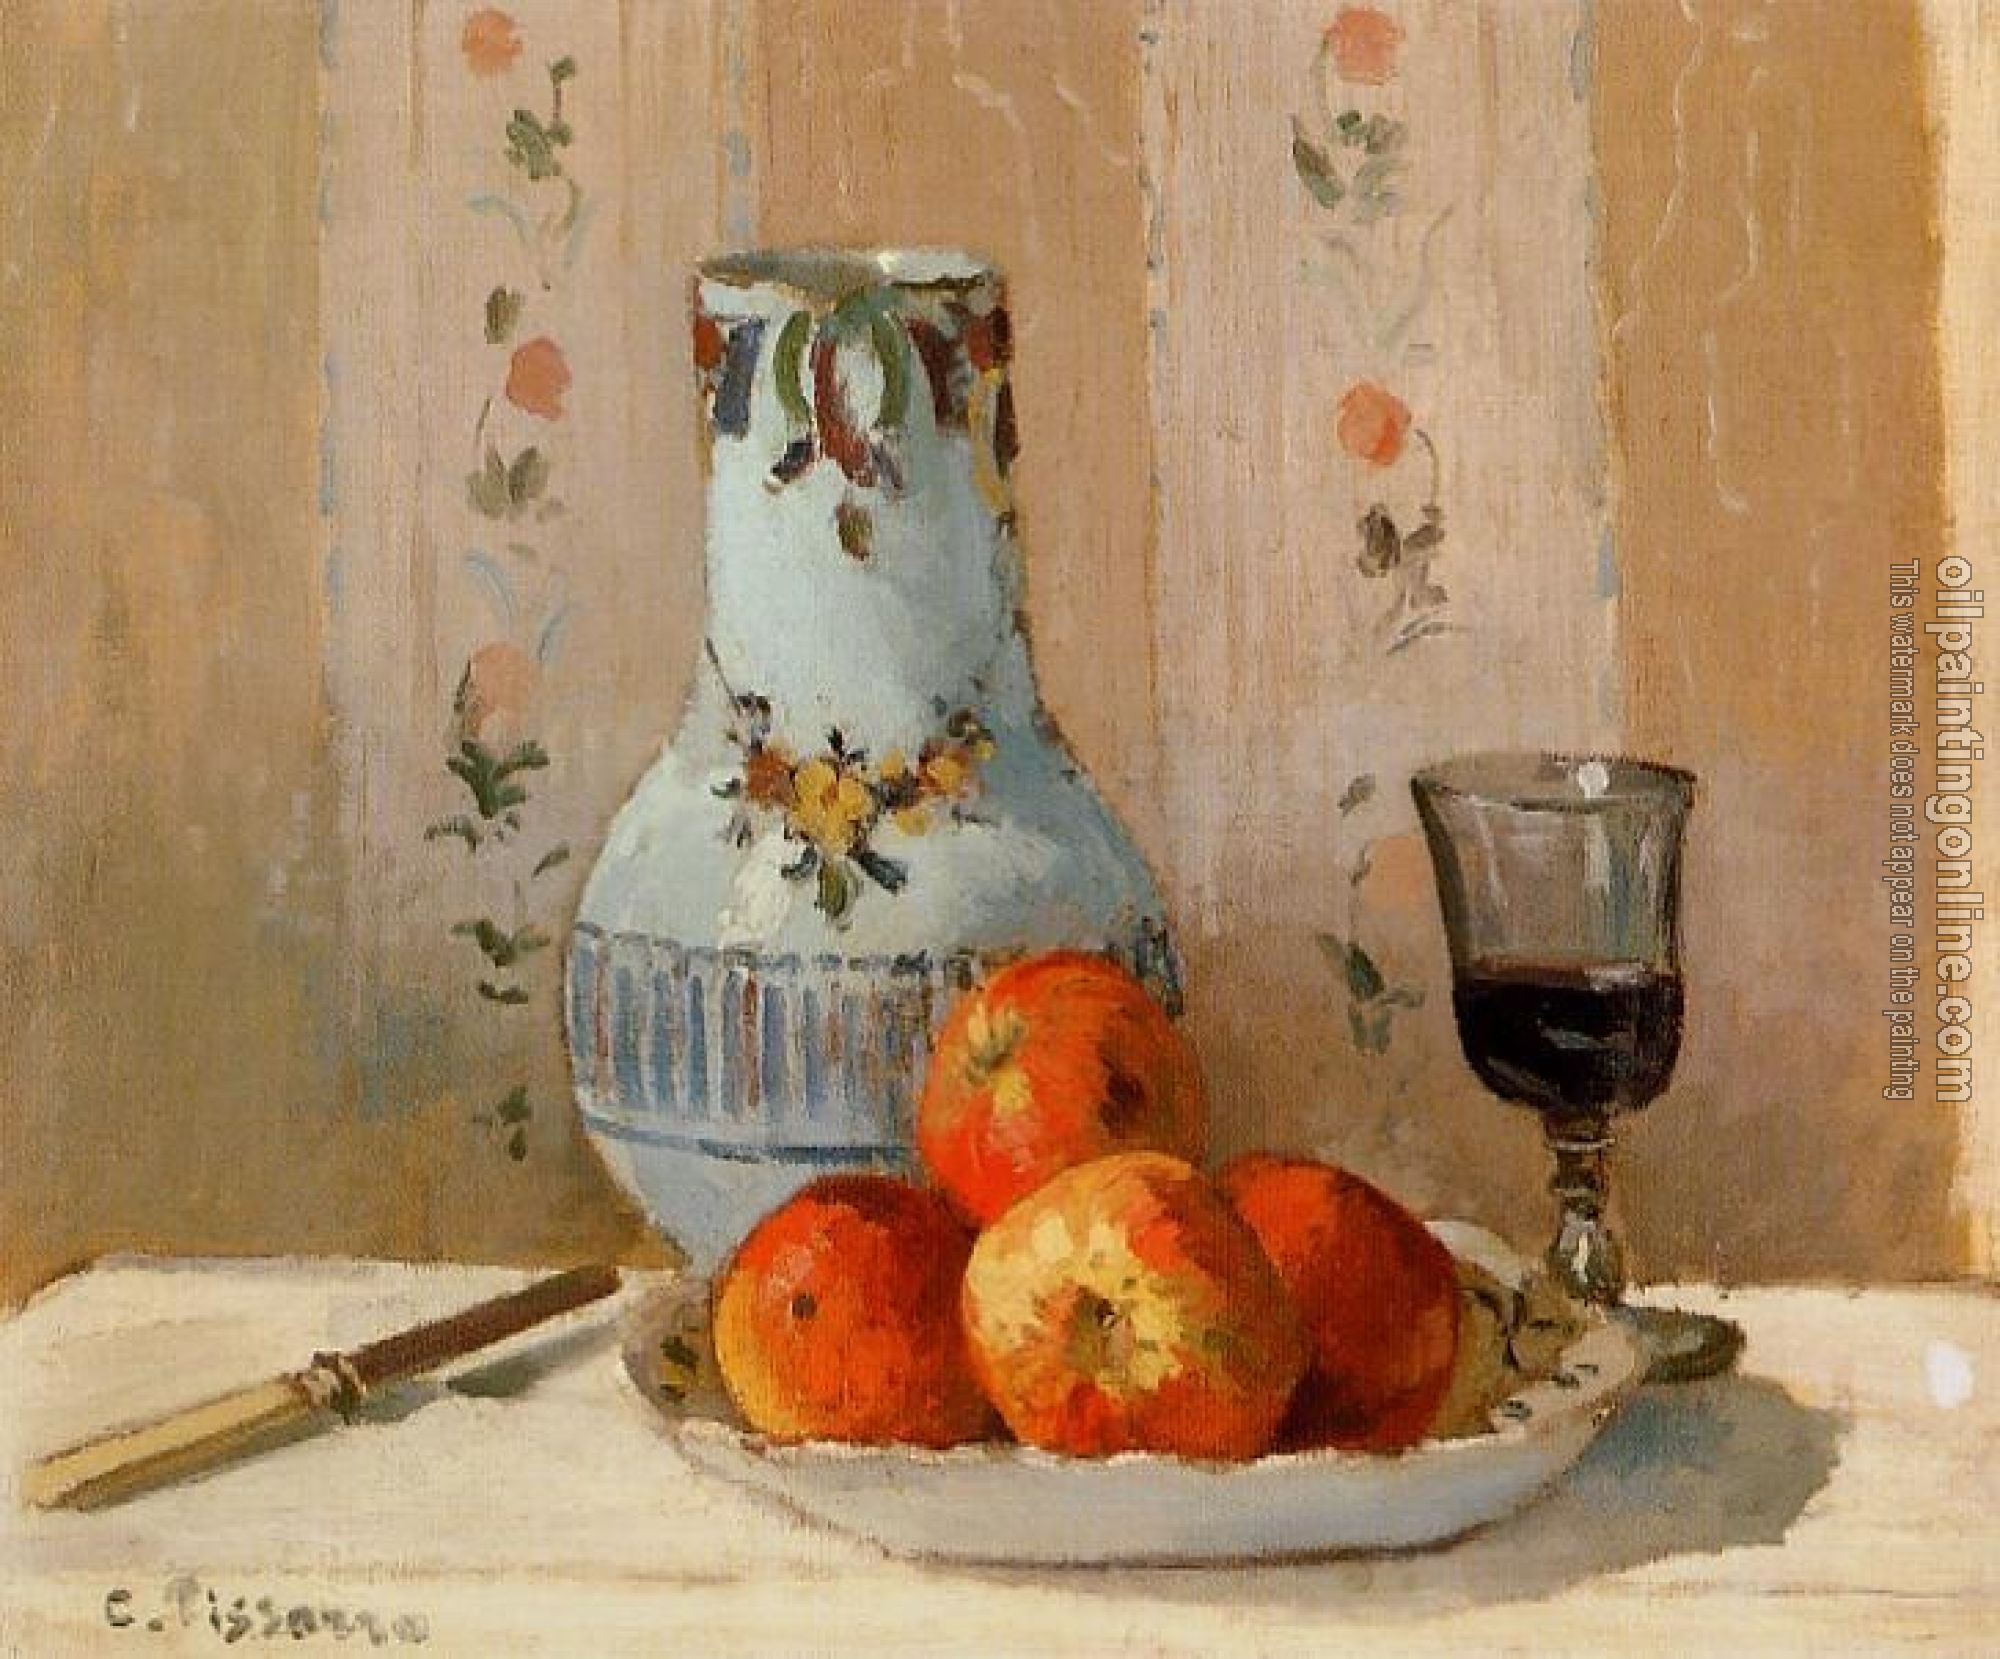 Pissarro, Camille - Still Life with Apples and Pitcher